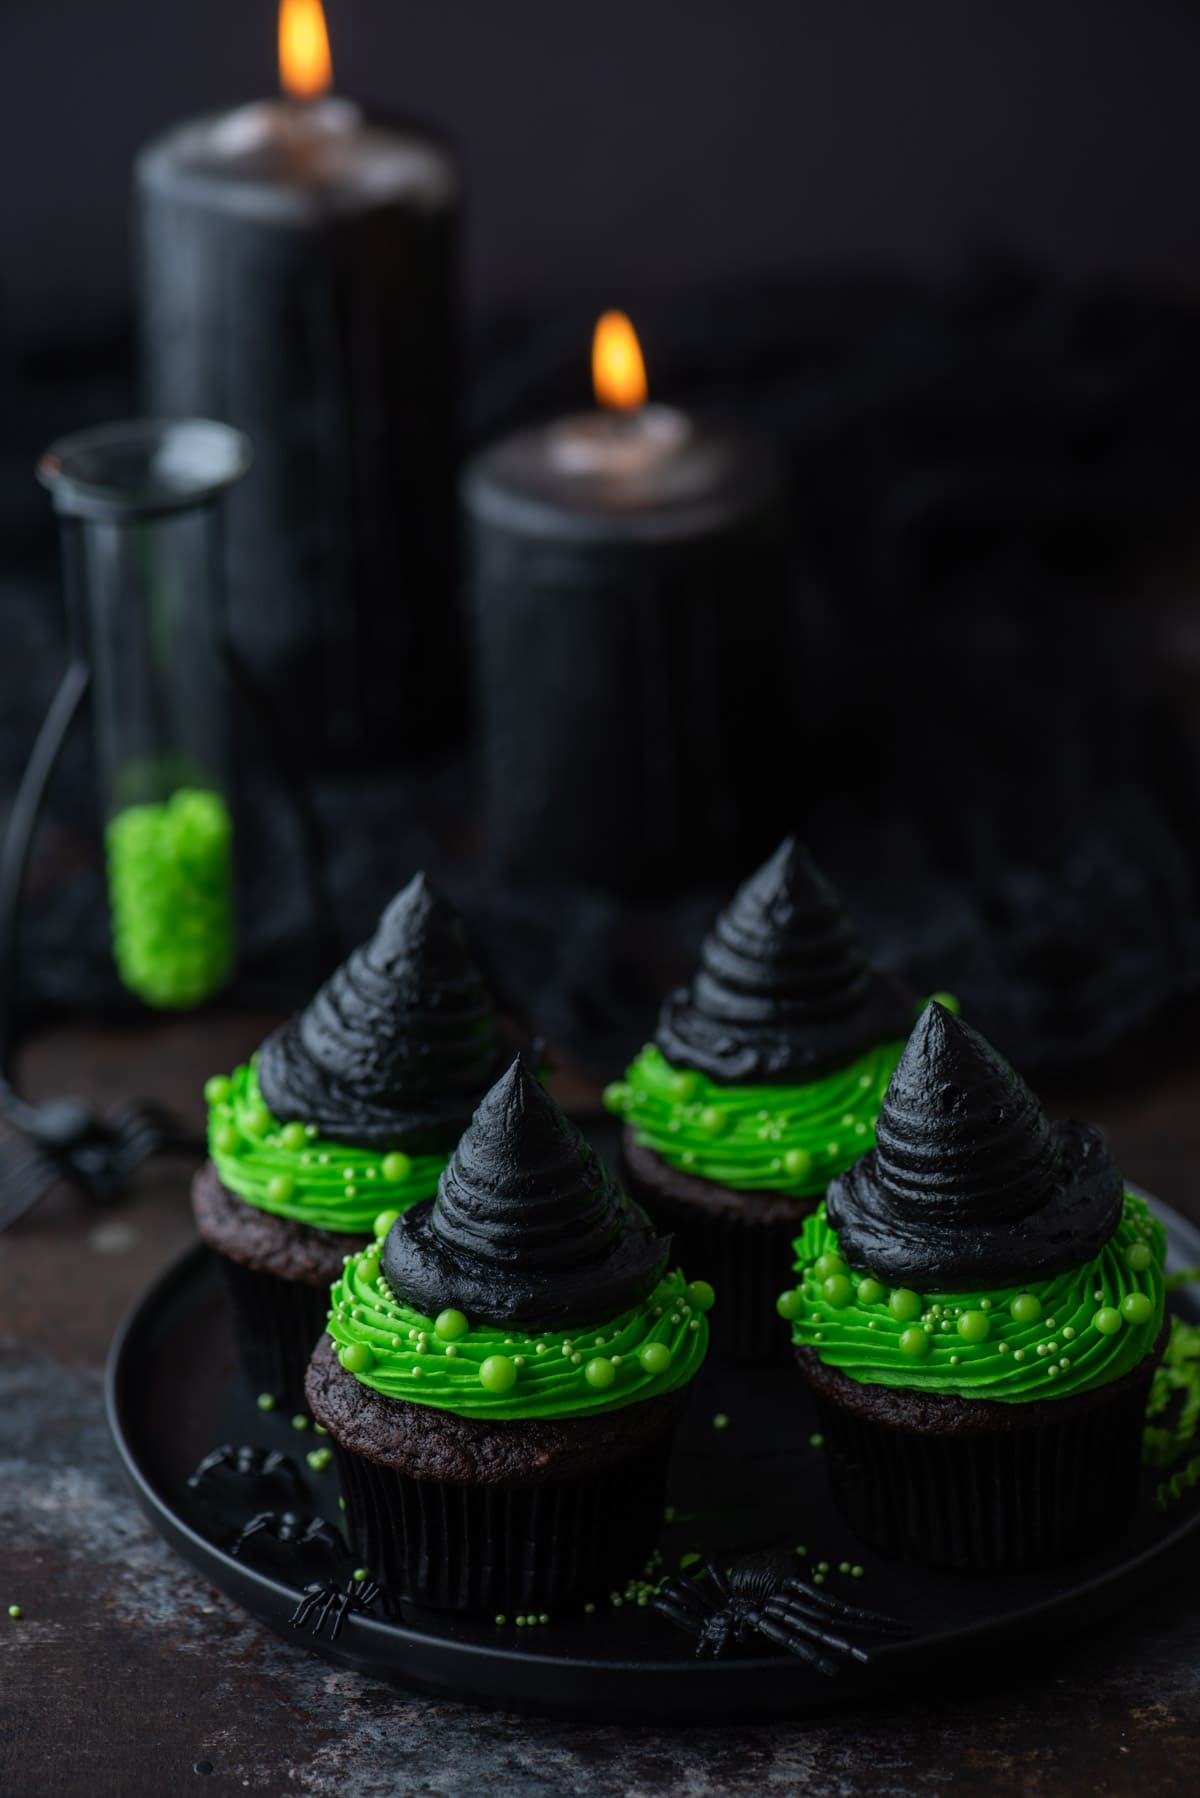 Witch hat cupcakes on a black plate with black candles in the background